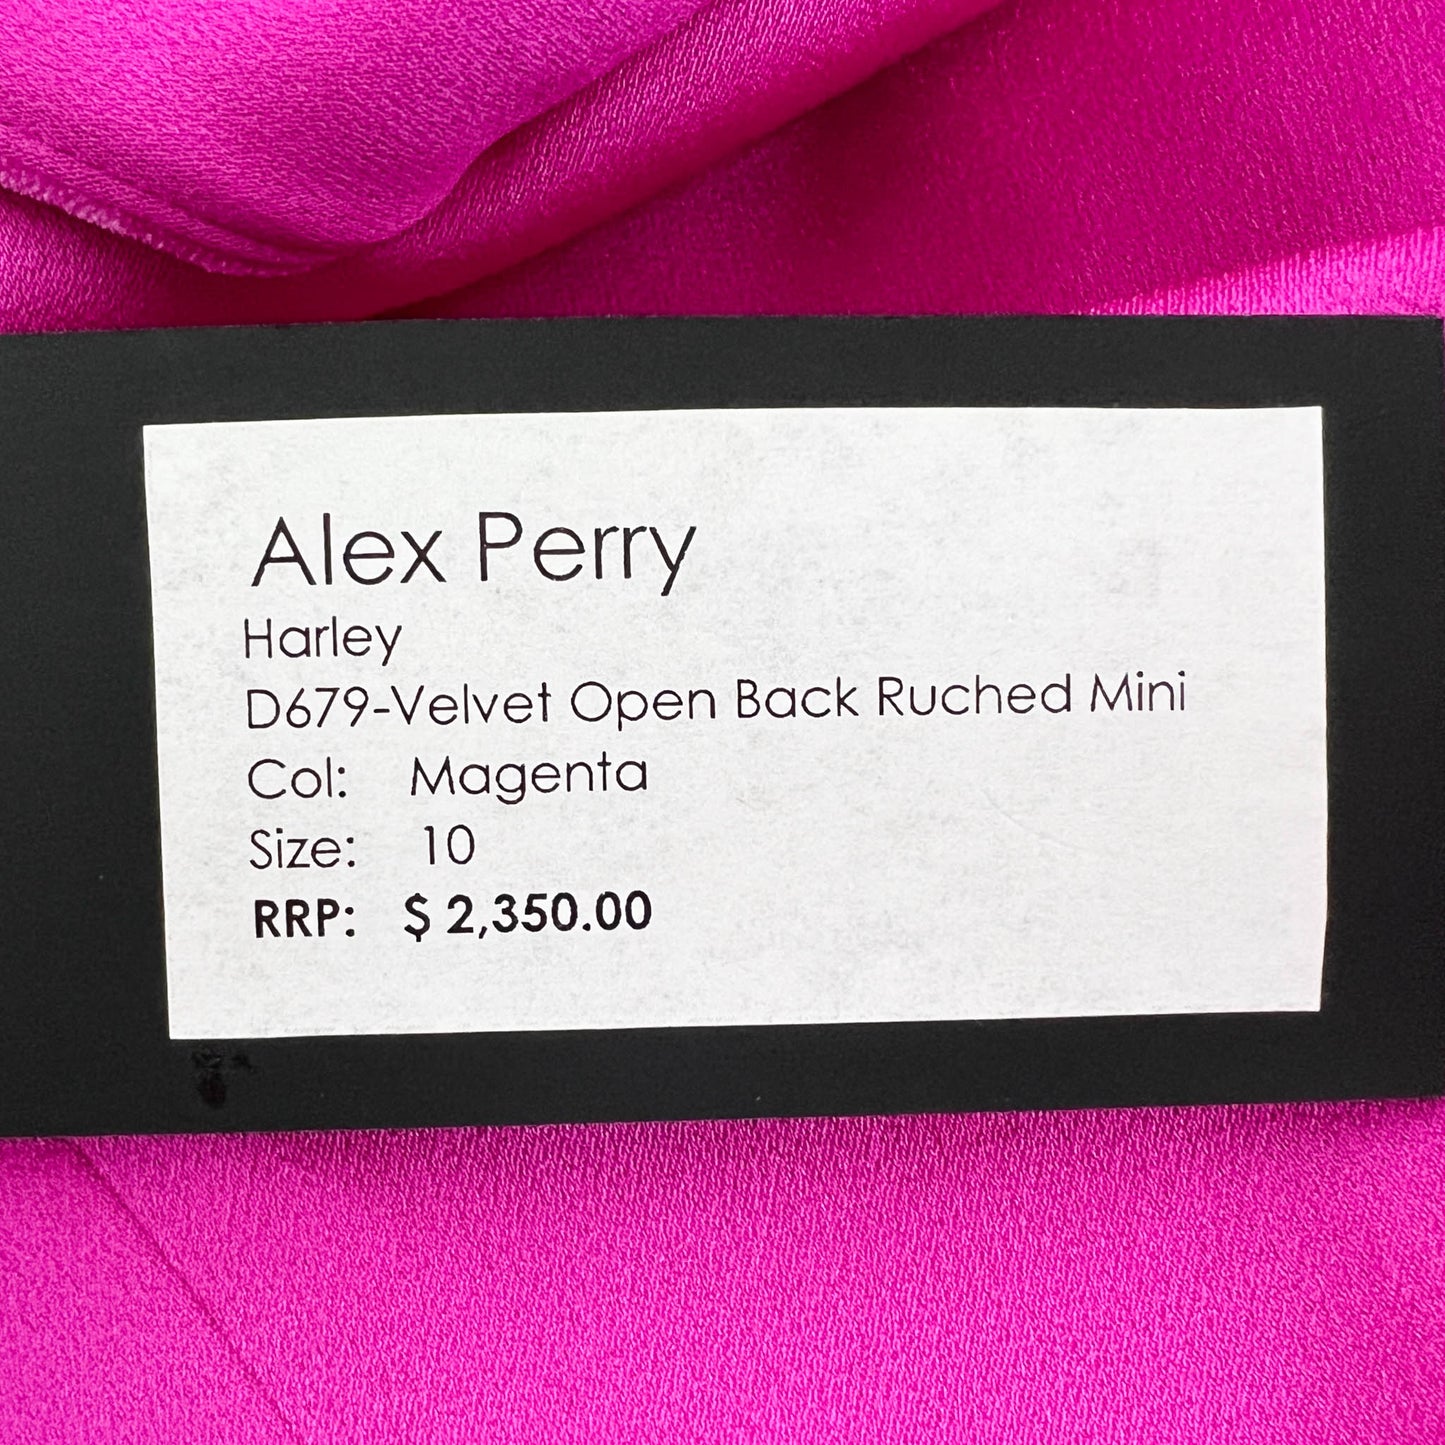 Alex Perry Harley Pink Velvet Open Back Ruched Mini Dress 10